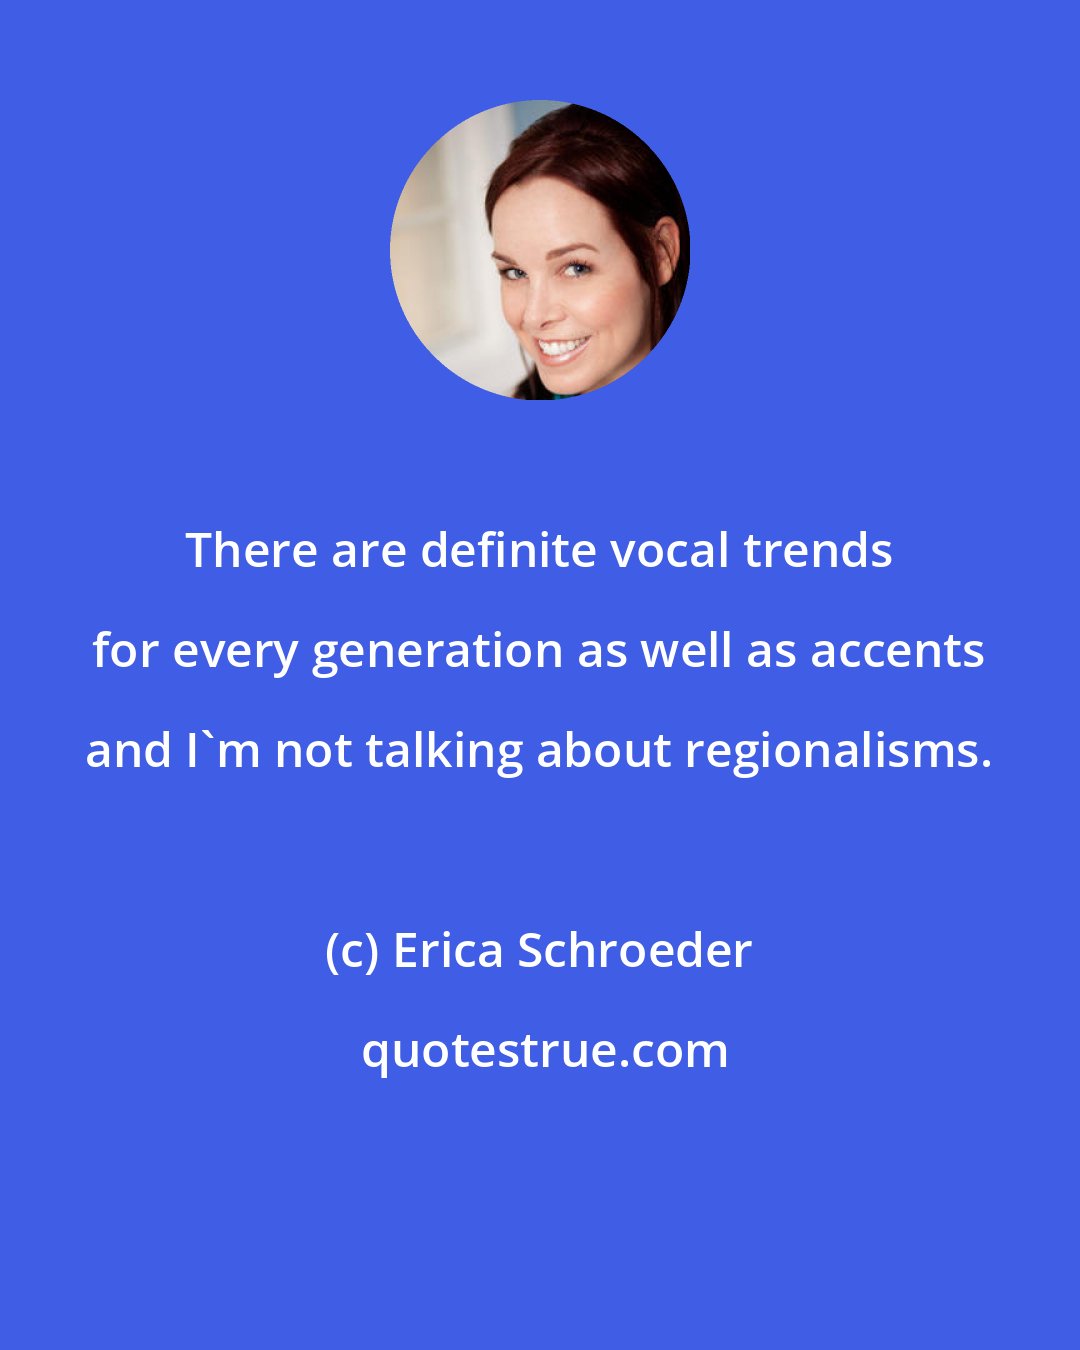 Erica Schroeder: There are definite vocal trends for every generation as well as accents and I'm not talking about regionalisms.